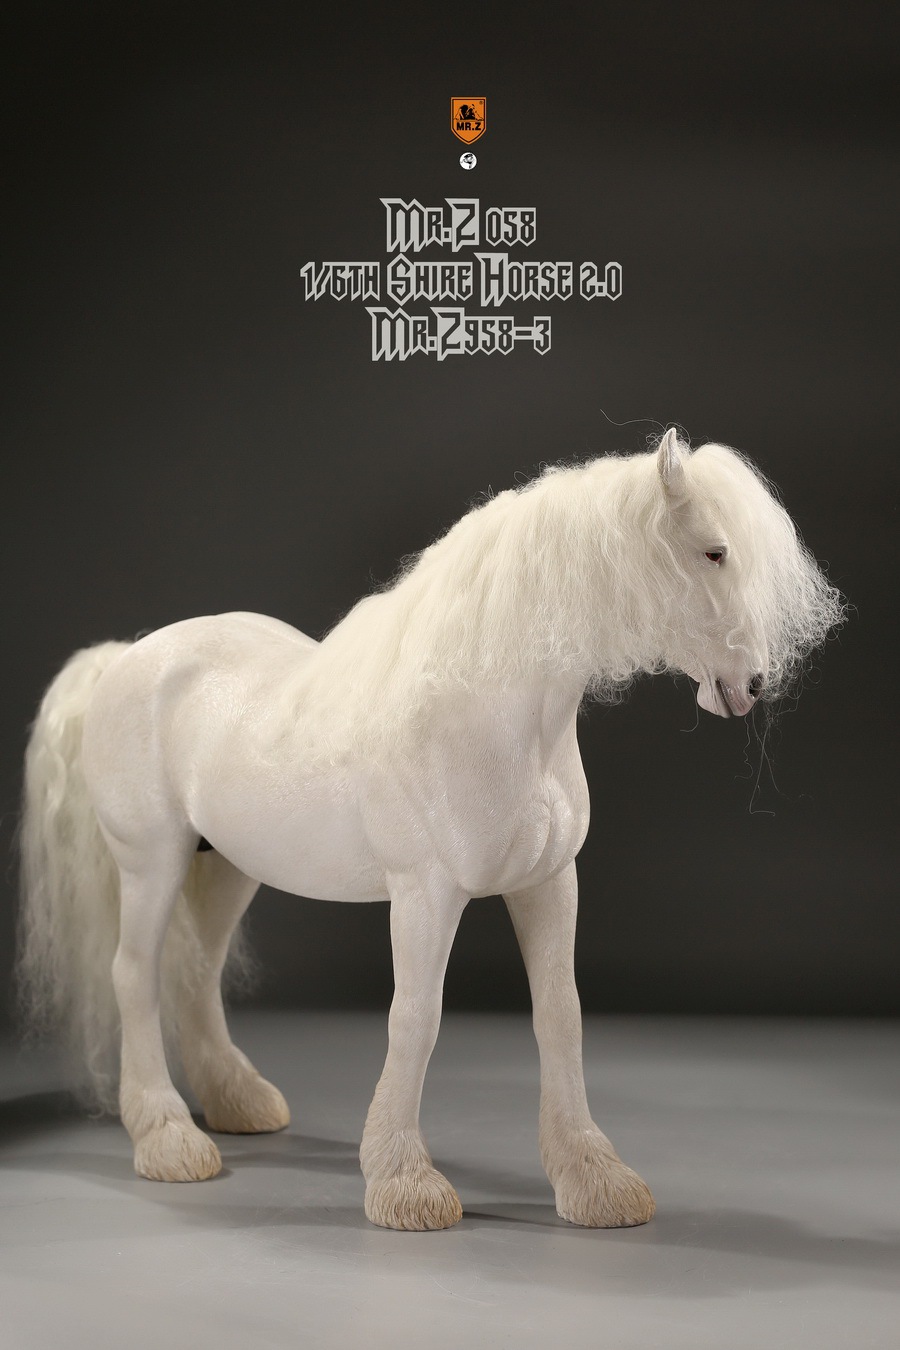 NEW PRODUCT: MR. Z: 58th round-Shire Horse 2.0 version full set of 5 colors  08575410